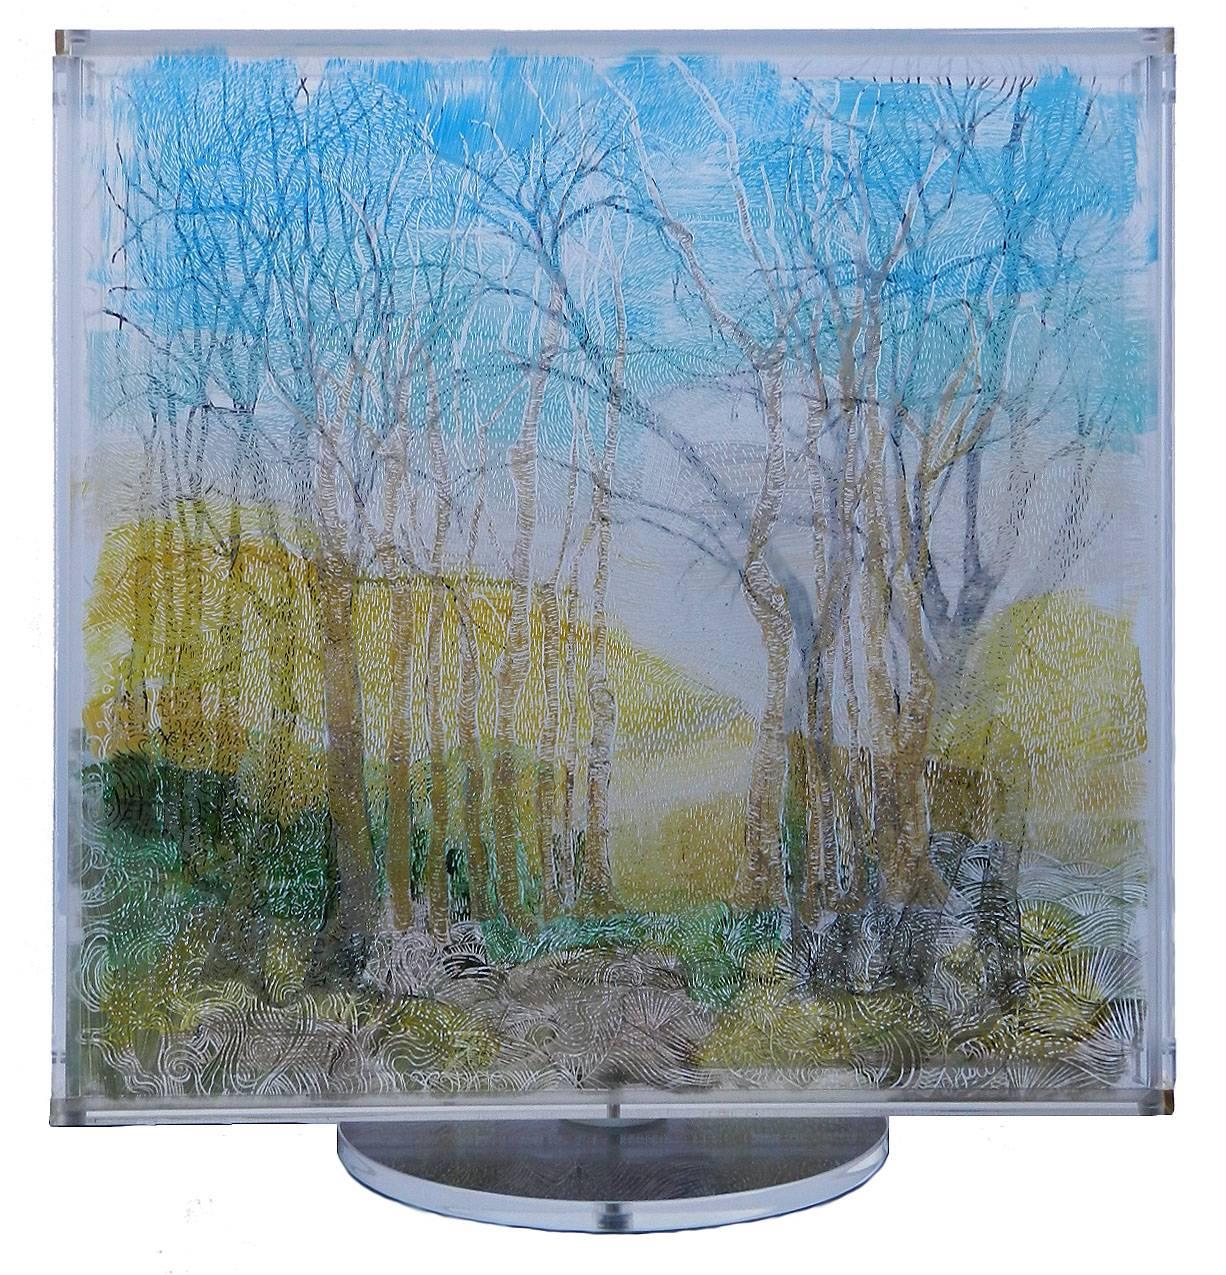 Revolving sculpture double-sided 3D painting on perspex by Perez Periarte
Unusual innovative artwork from this contemporary French artist
Two different images painted on clear perspex sheets allowing light to pass through and mounted together